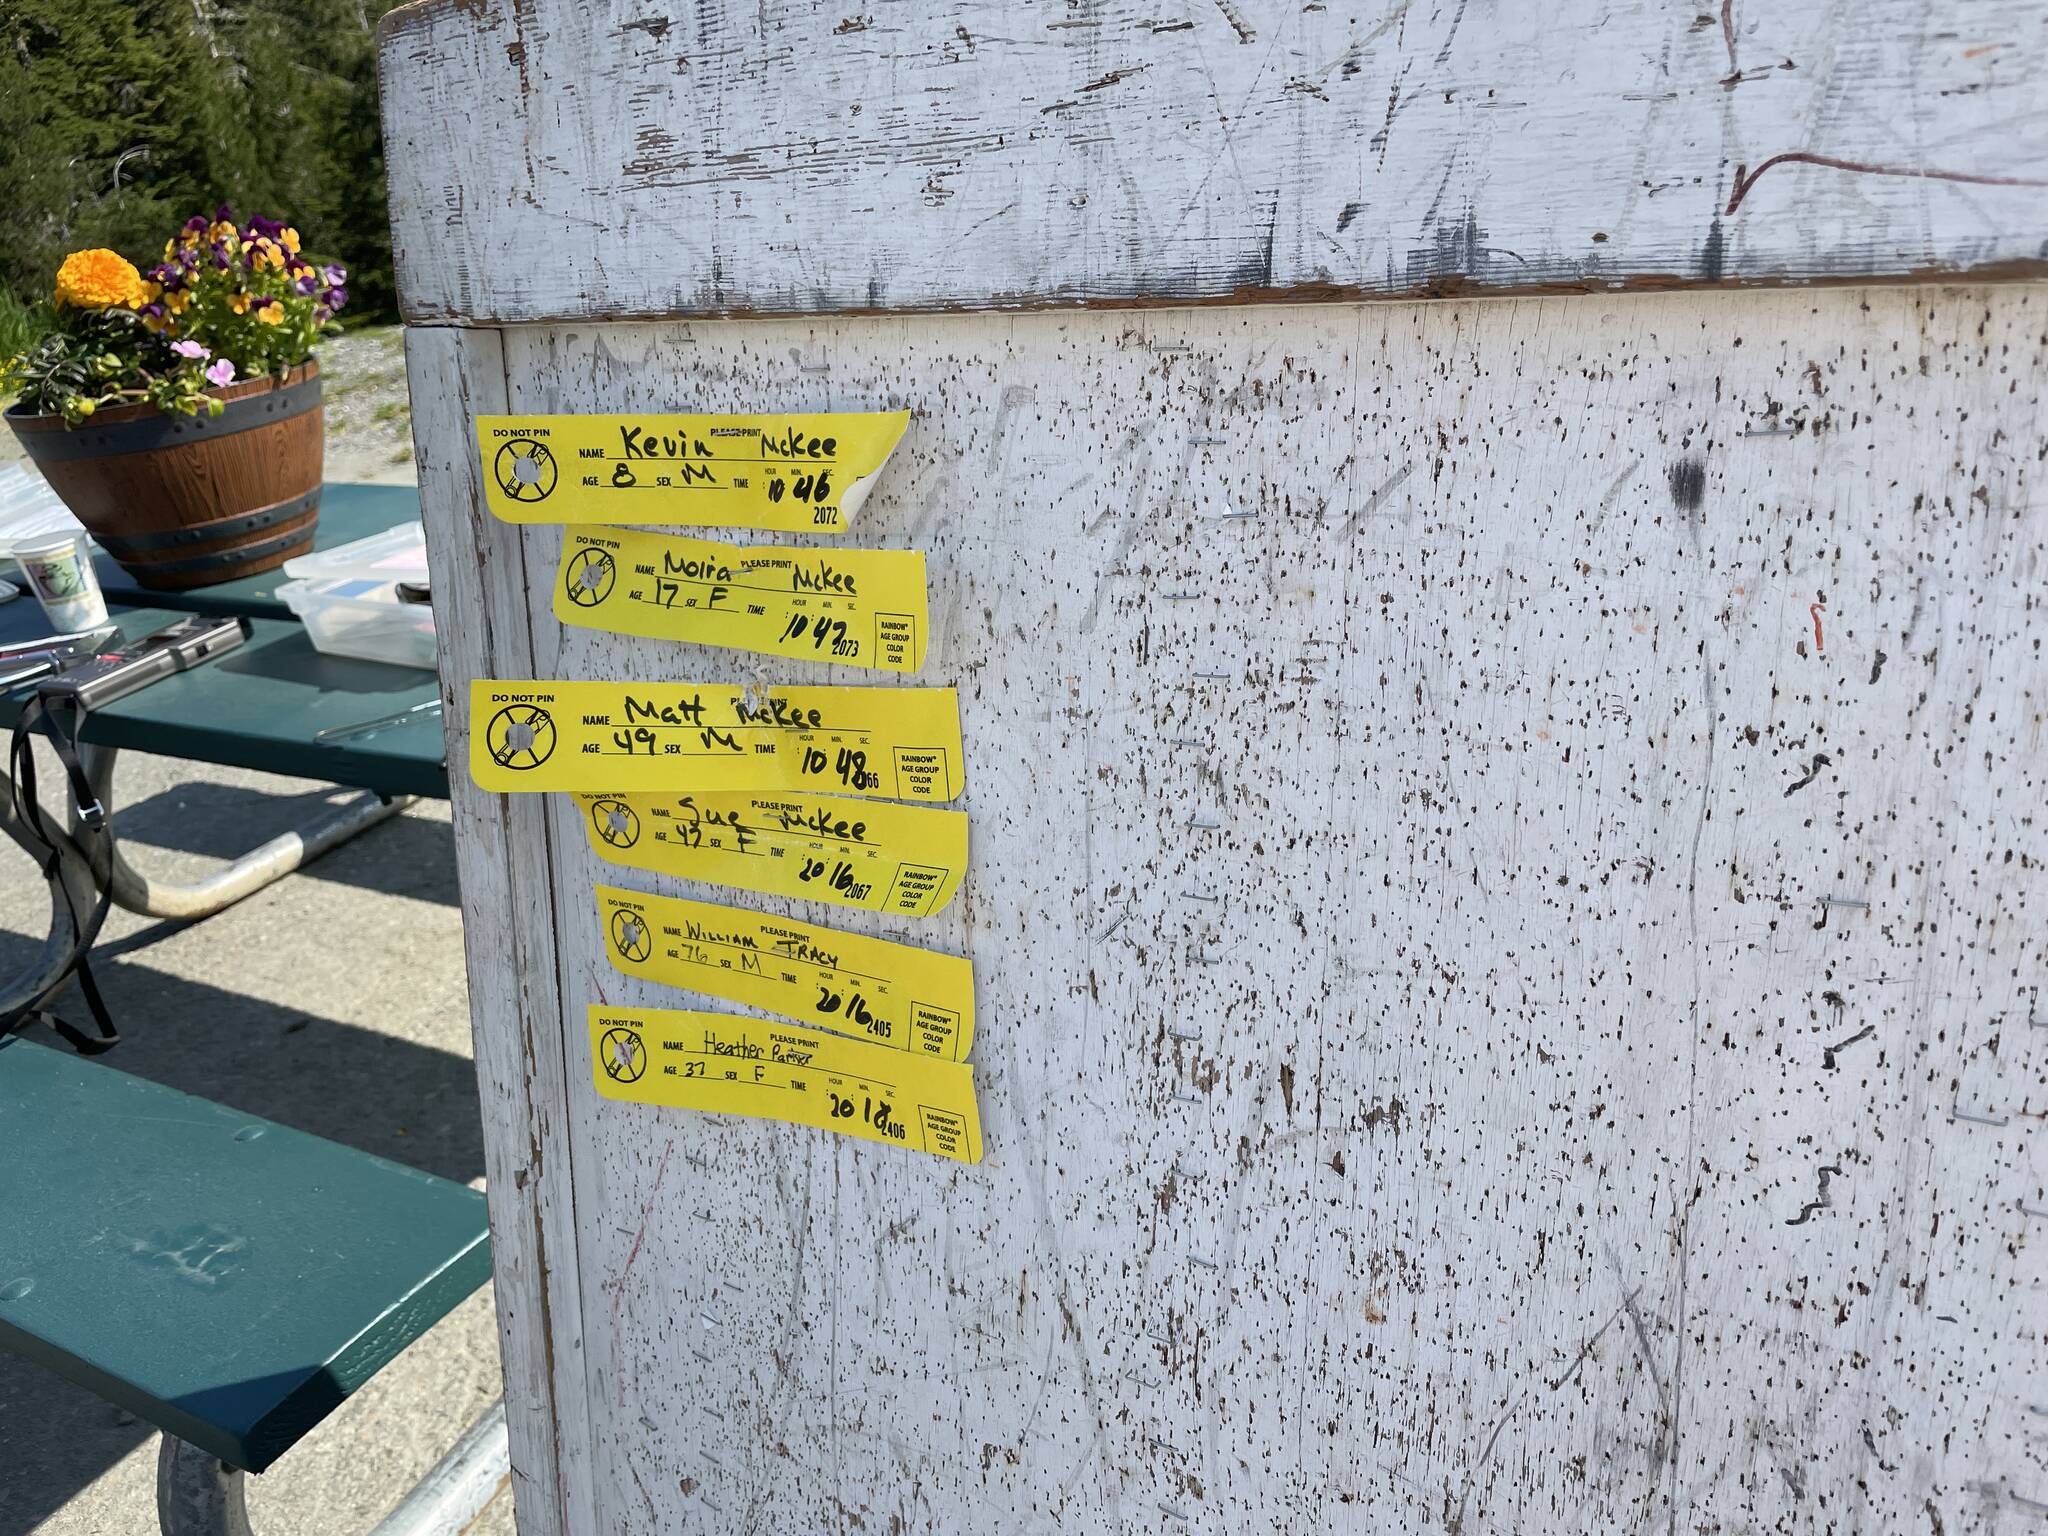 One-miler finisher tags adorn the board for the Eaglecrest Road and Ridge Race on July 2, 2022. (Michael S. Lockett / Juneau Empire)